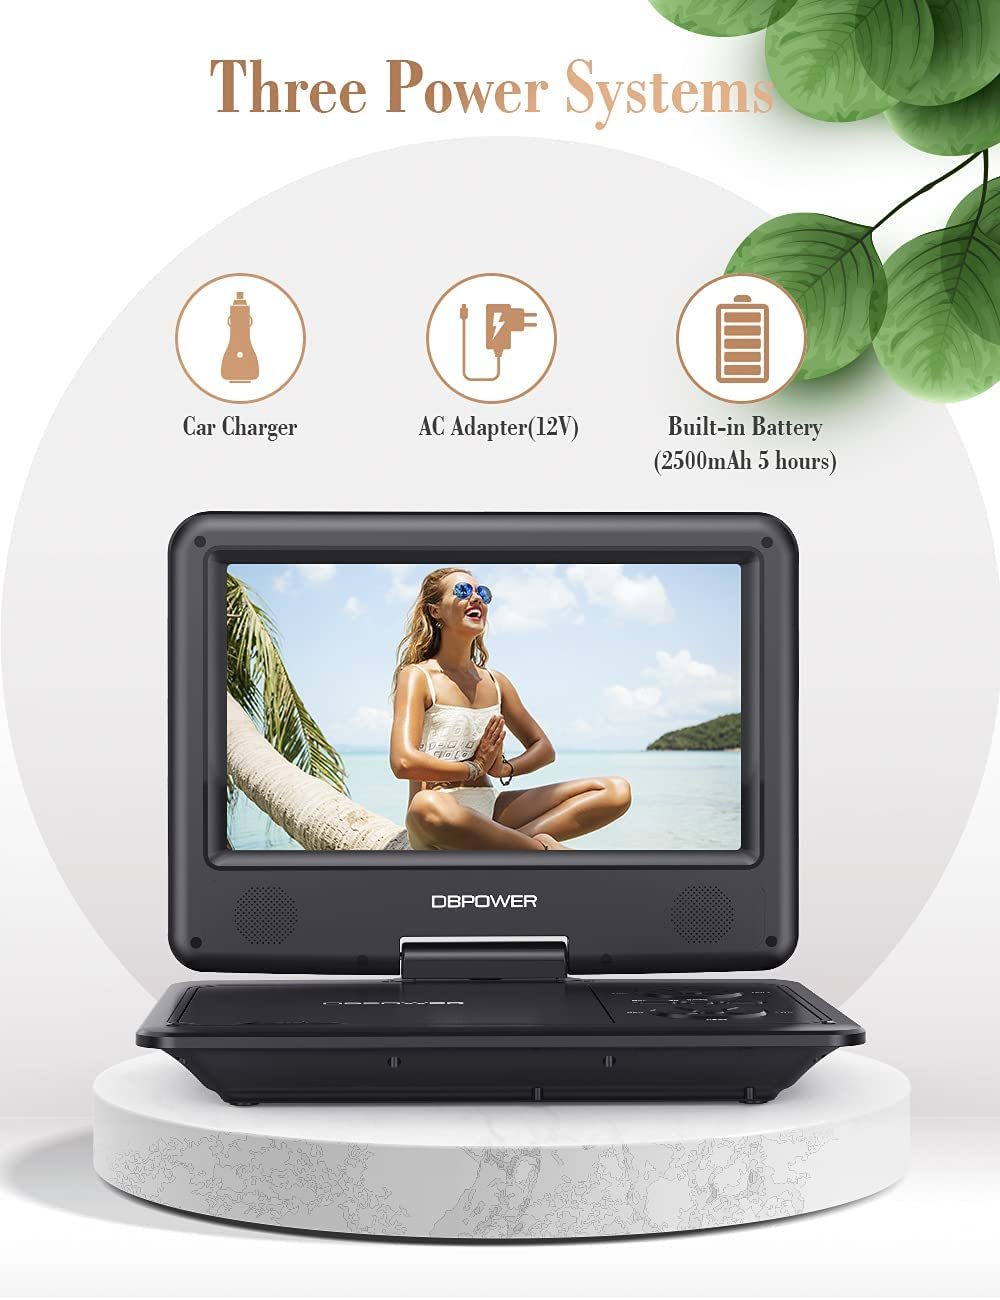 DBPOWER 11.5" Portable DVD Player, 5-Hour Built-in Rechargeable Battery, 9" Swivel Screen, Support CD/DVD/SD Card/USB, Remote Control, 1.8 Meter Car Charger, Power Adaptor and Car Headrest